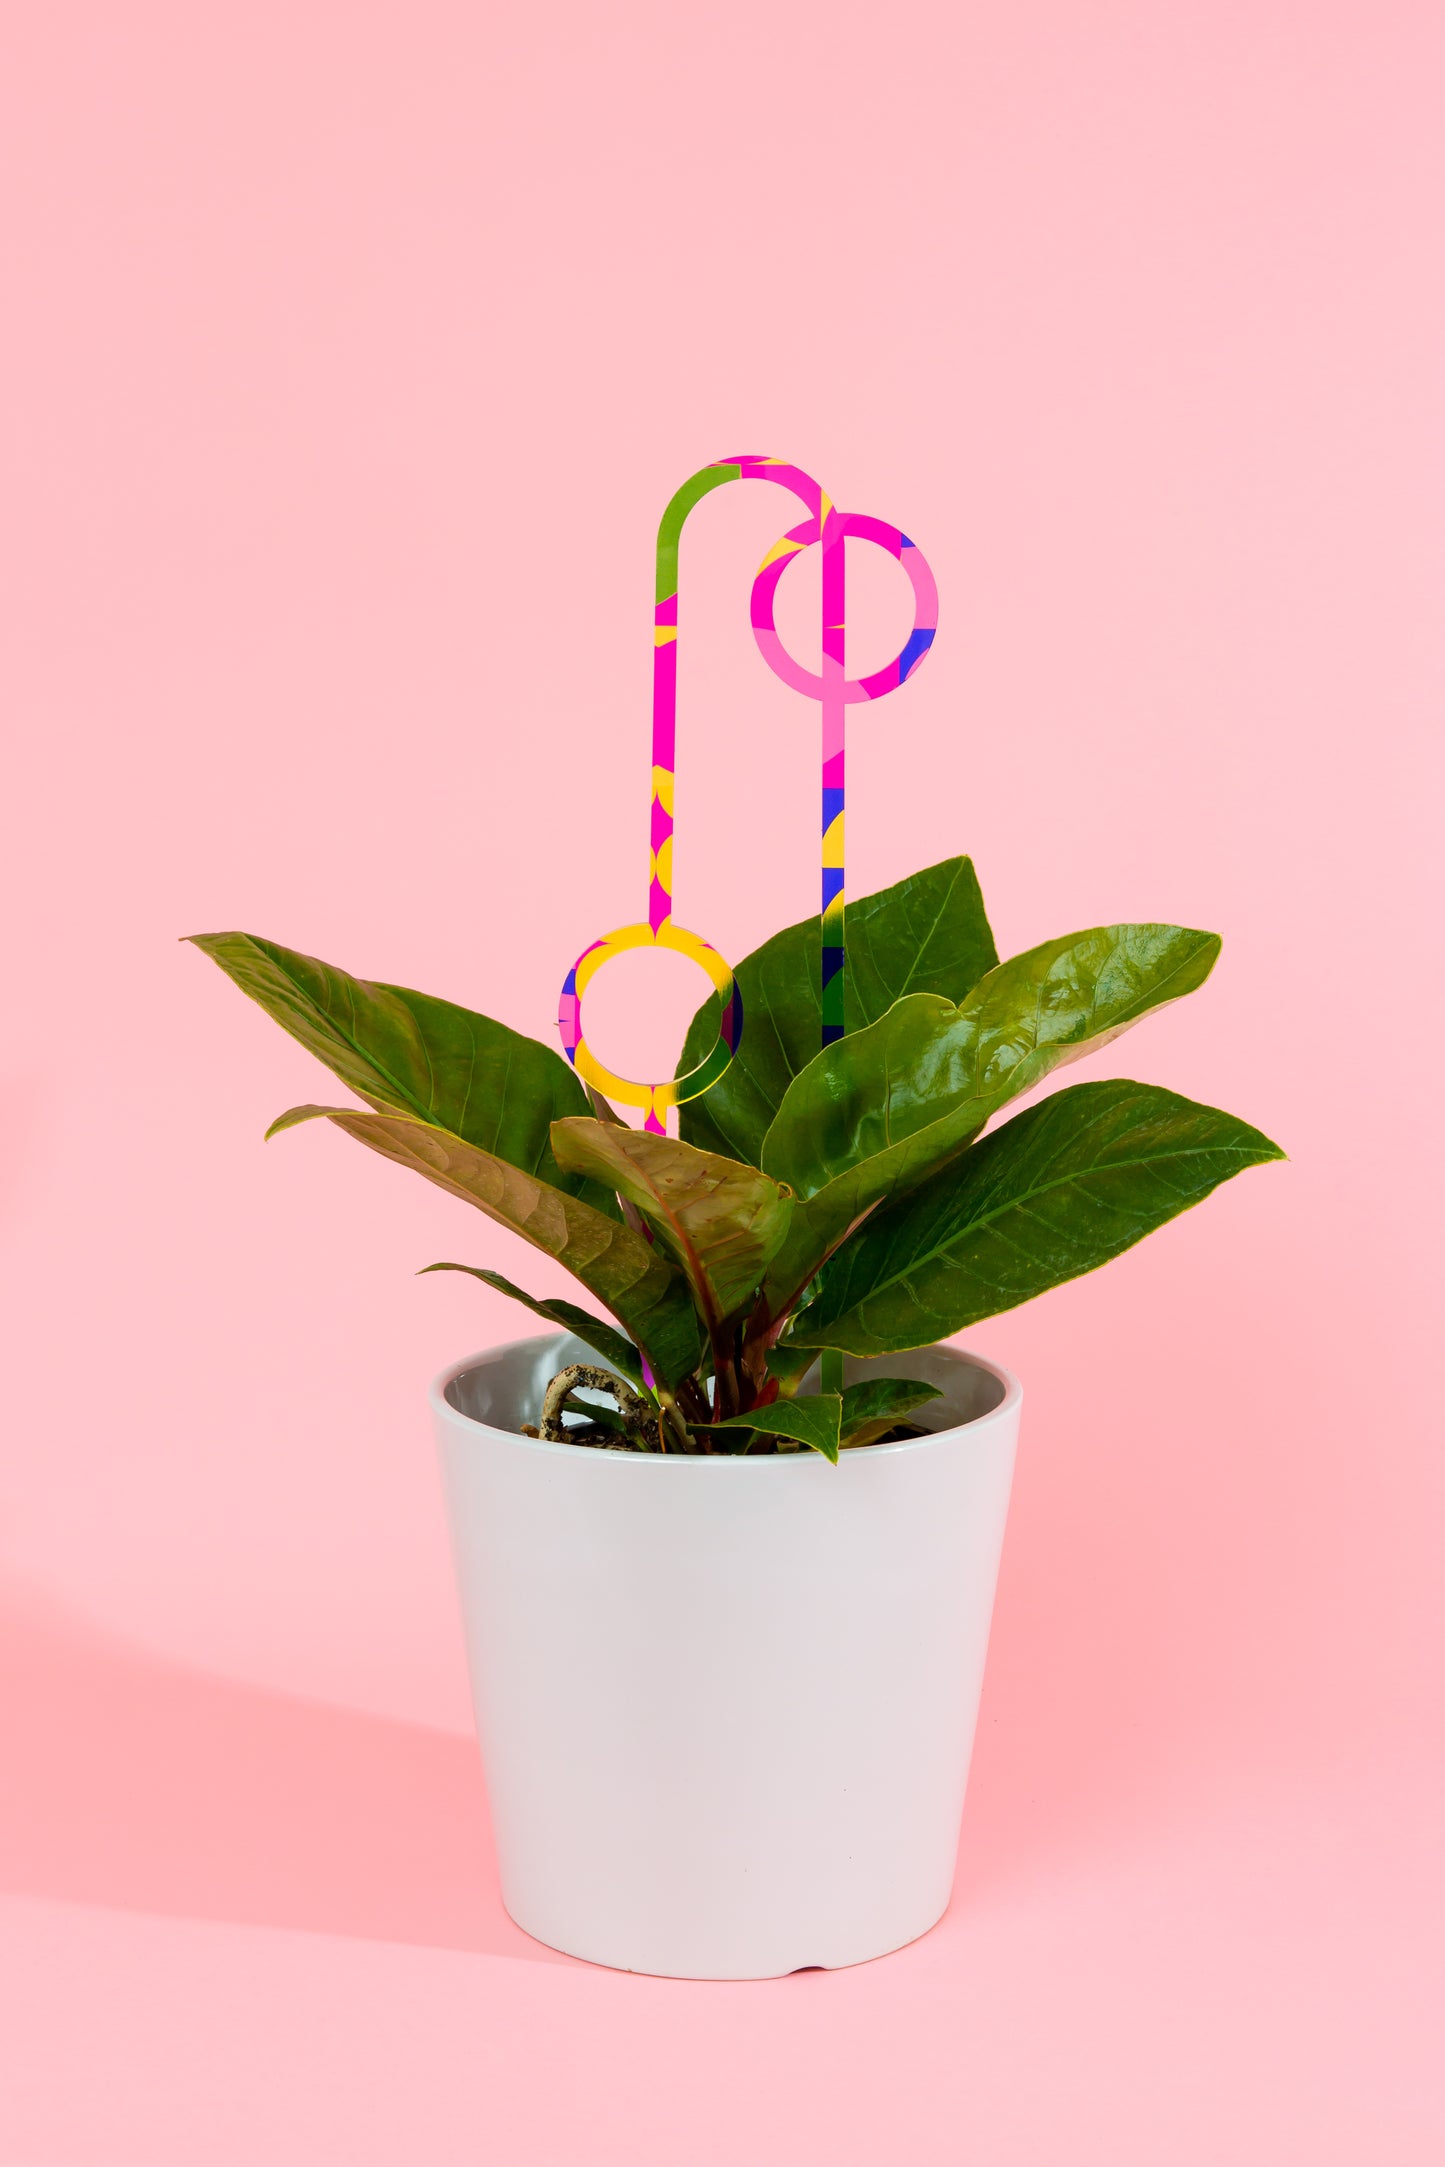 Acrylic Plant Stake 1 - Printed Large Bright Squiggle & Curve